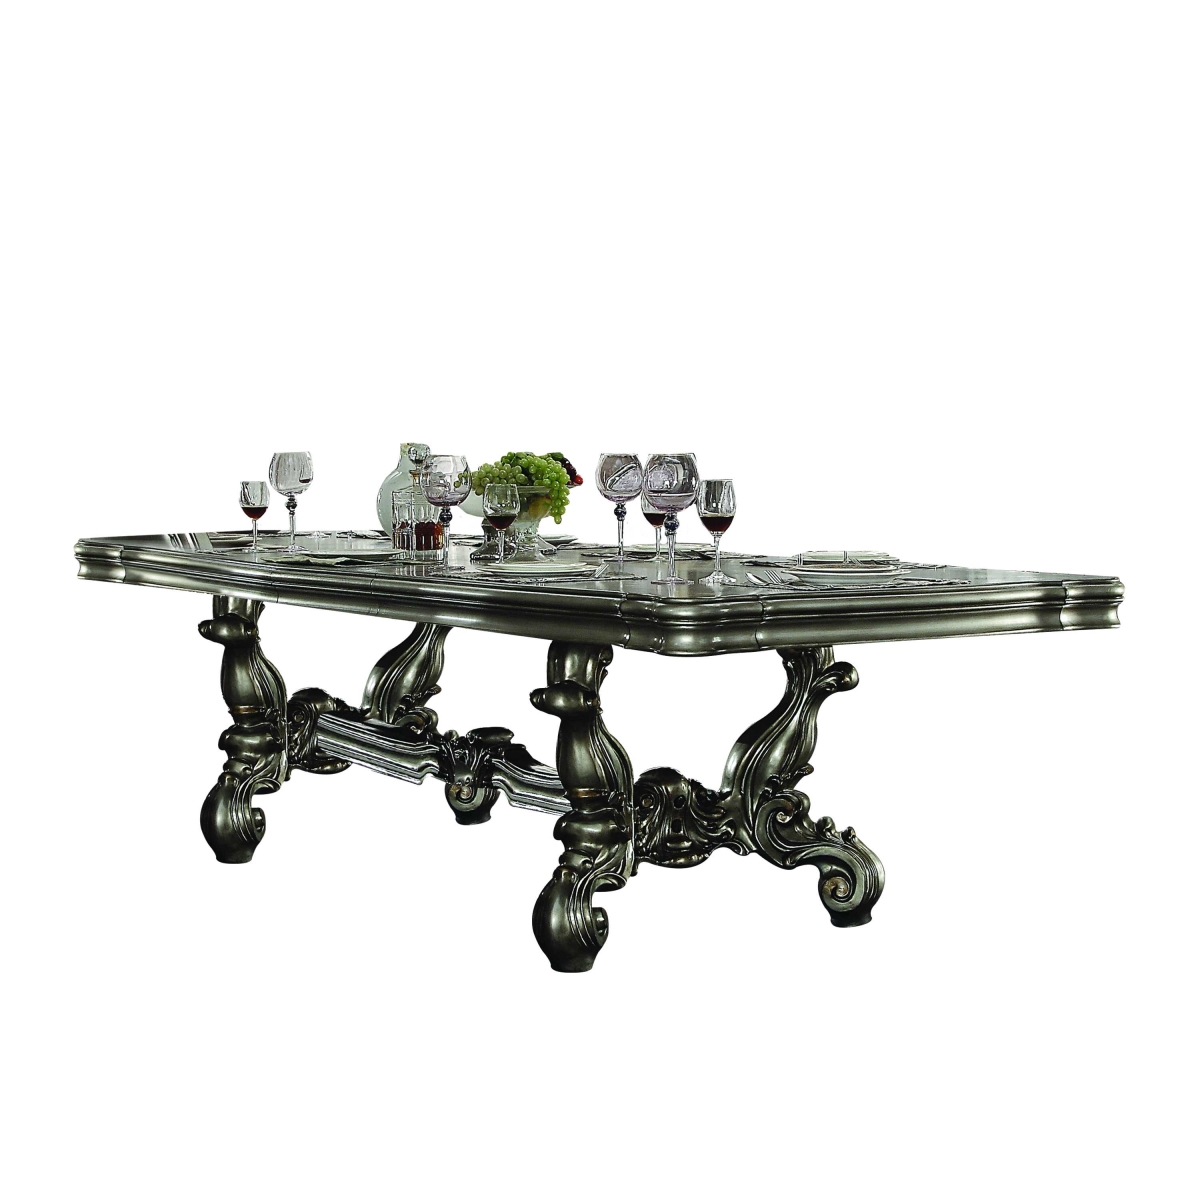 HomeRoots 348653 46 x 136 x 32 in. Antique Platinum Wood Poly Resin Dining Table